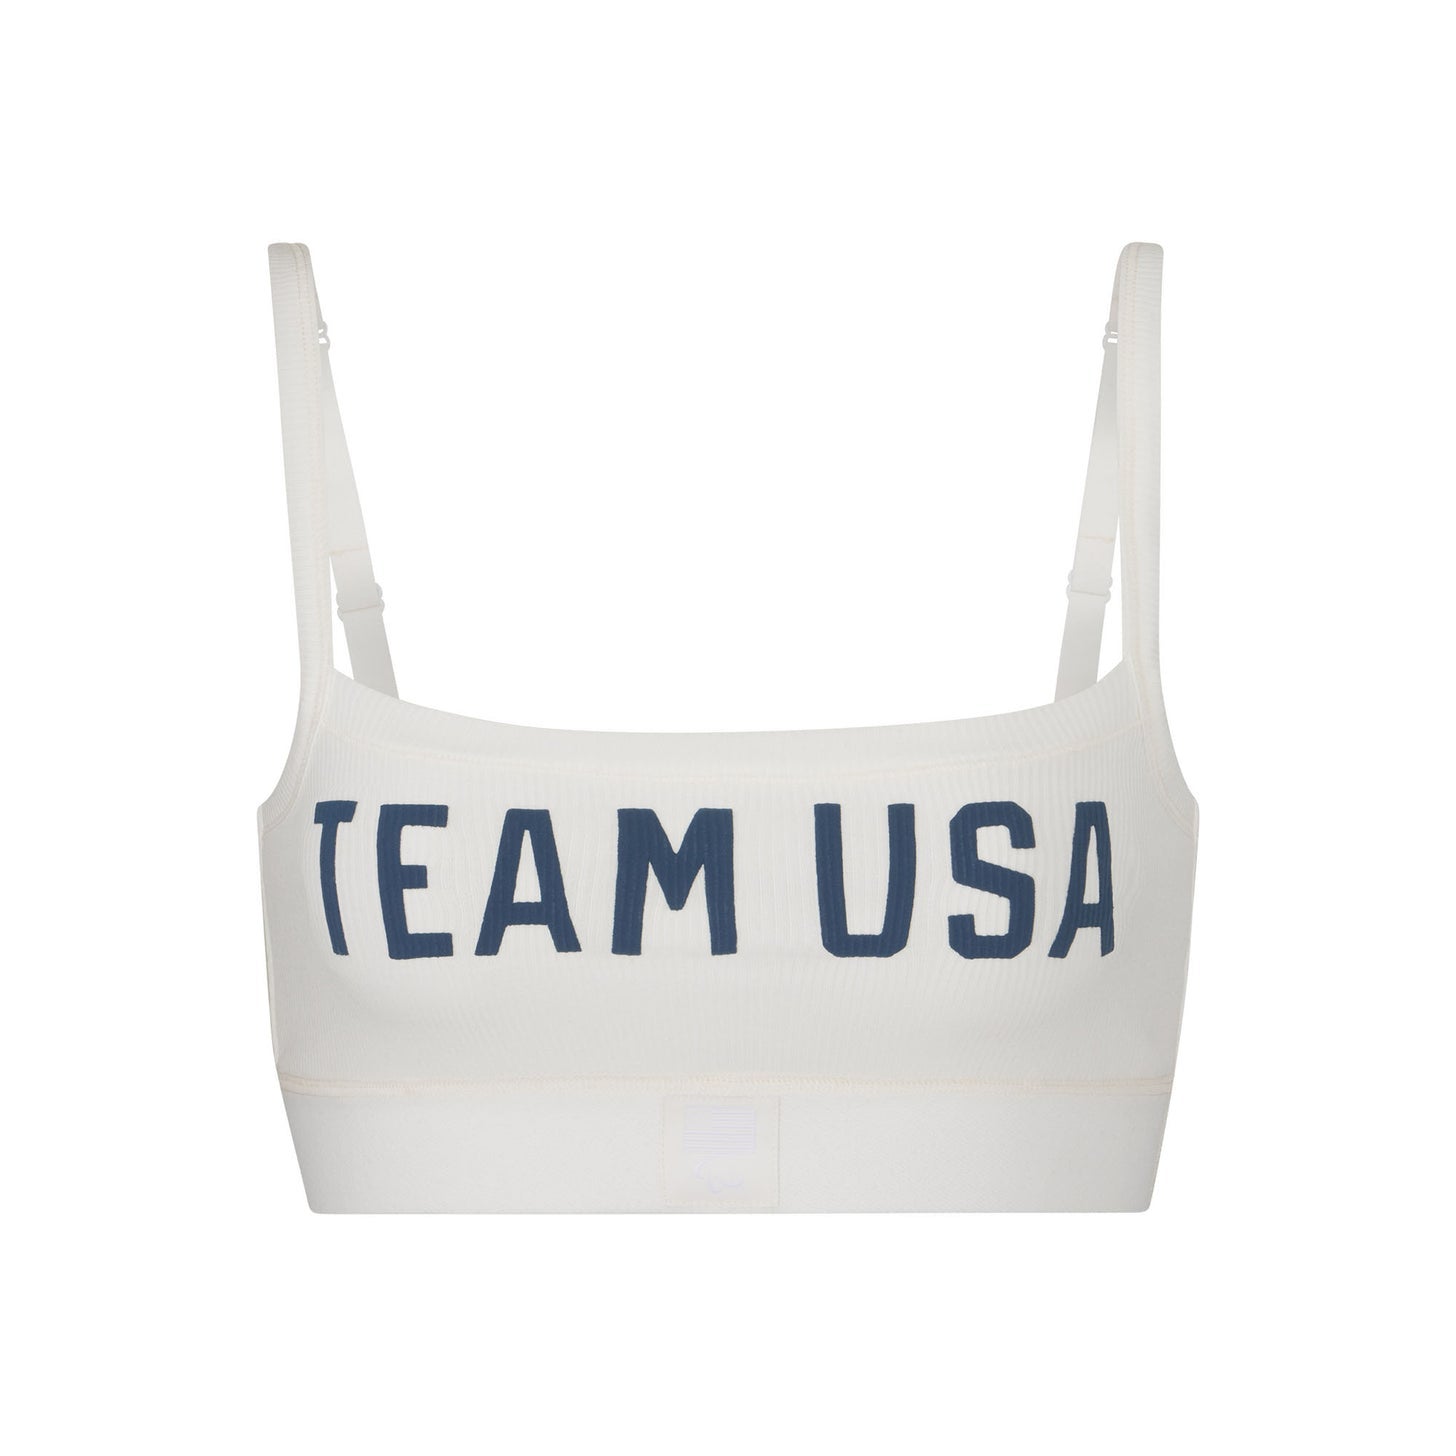 SKIMS Launches Team USA Collection for the 2022 Olympic Winter Games